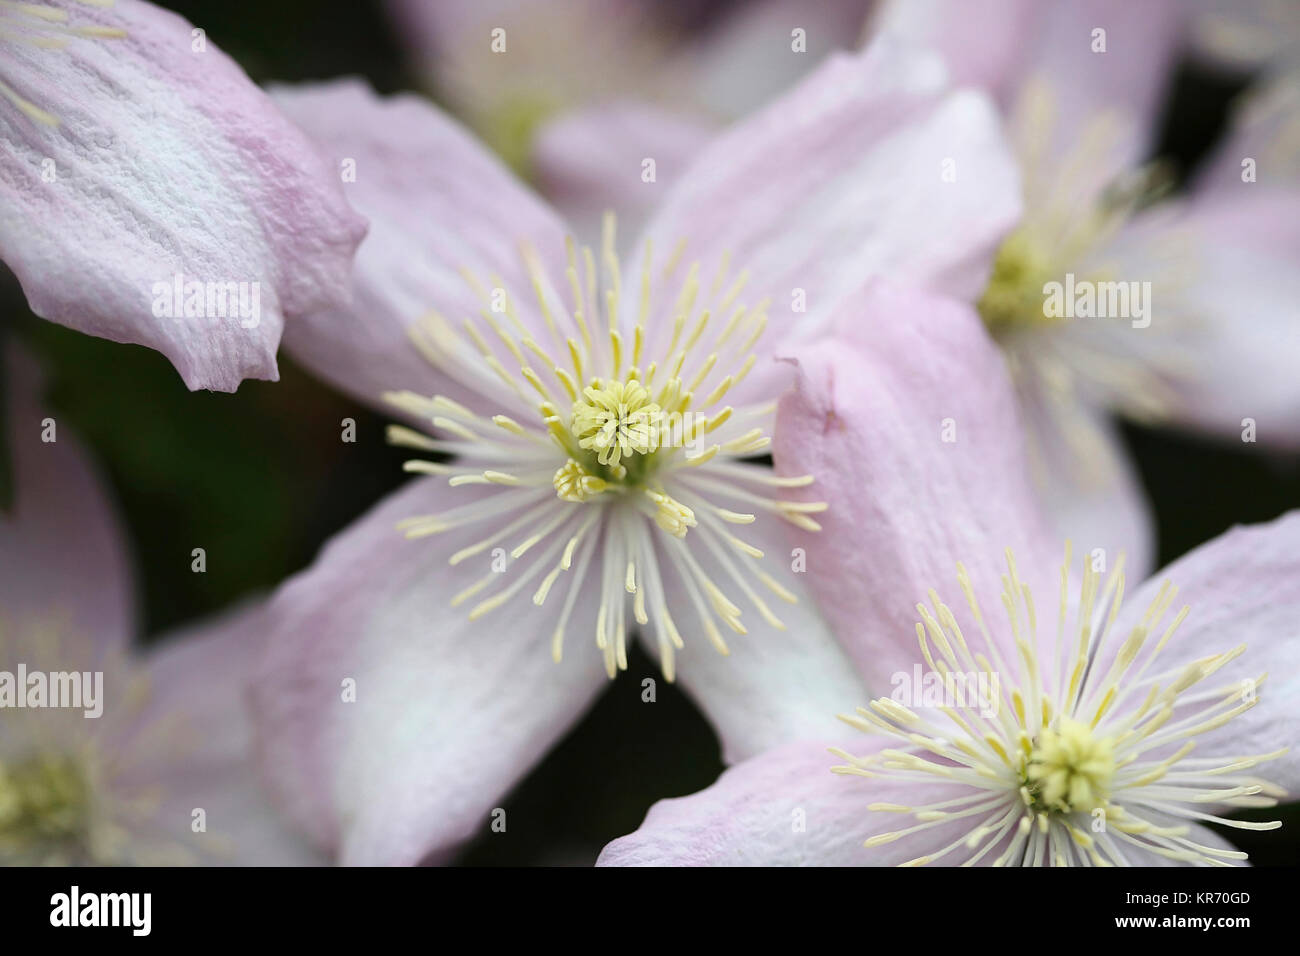 Clematis, Clematis Montana Wilsonii, A open white flower with pink tinging showing filaments and stamen. Stock Photo